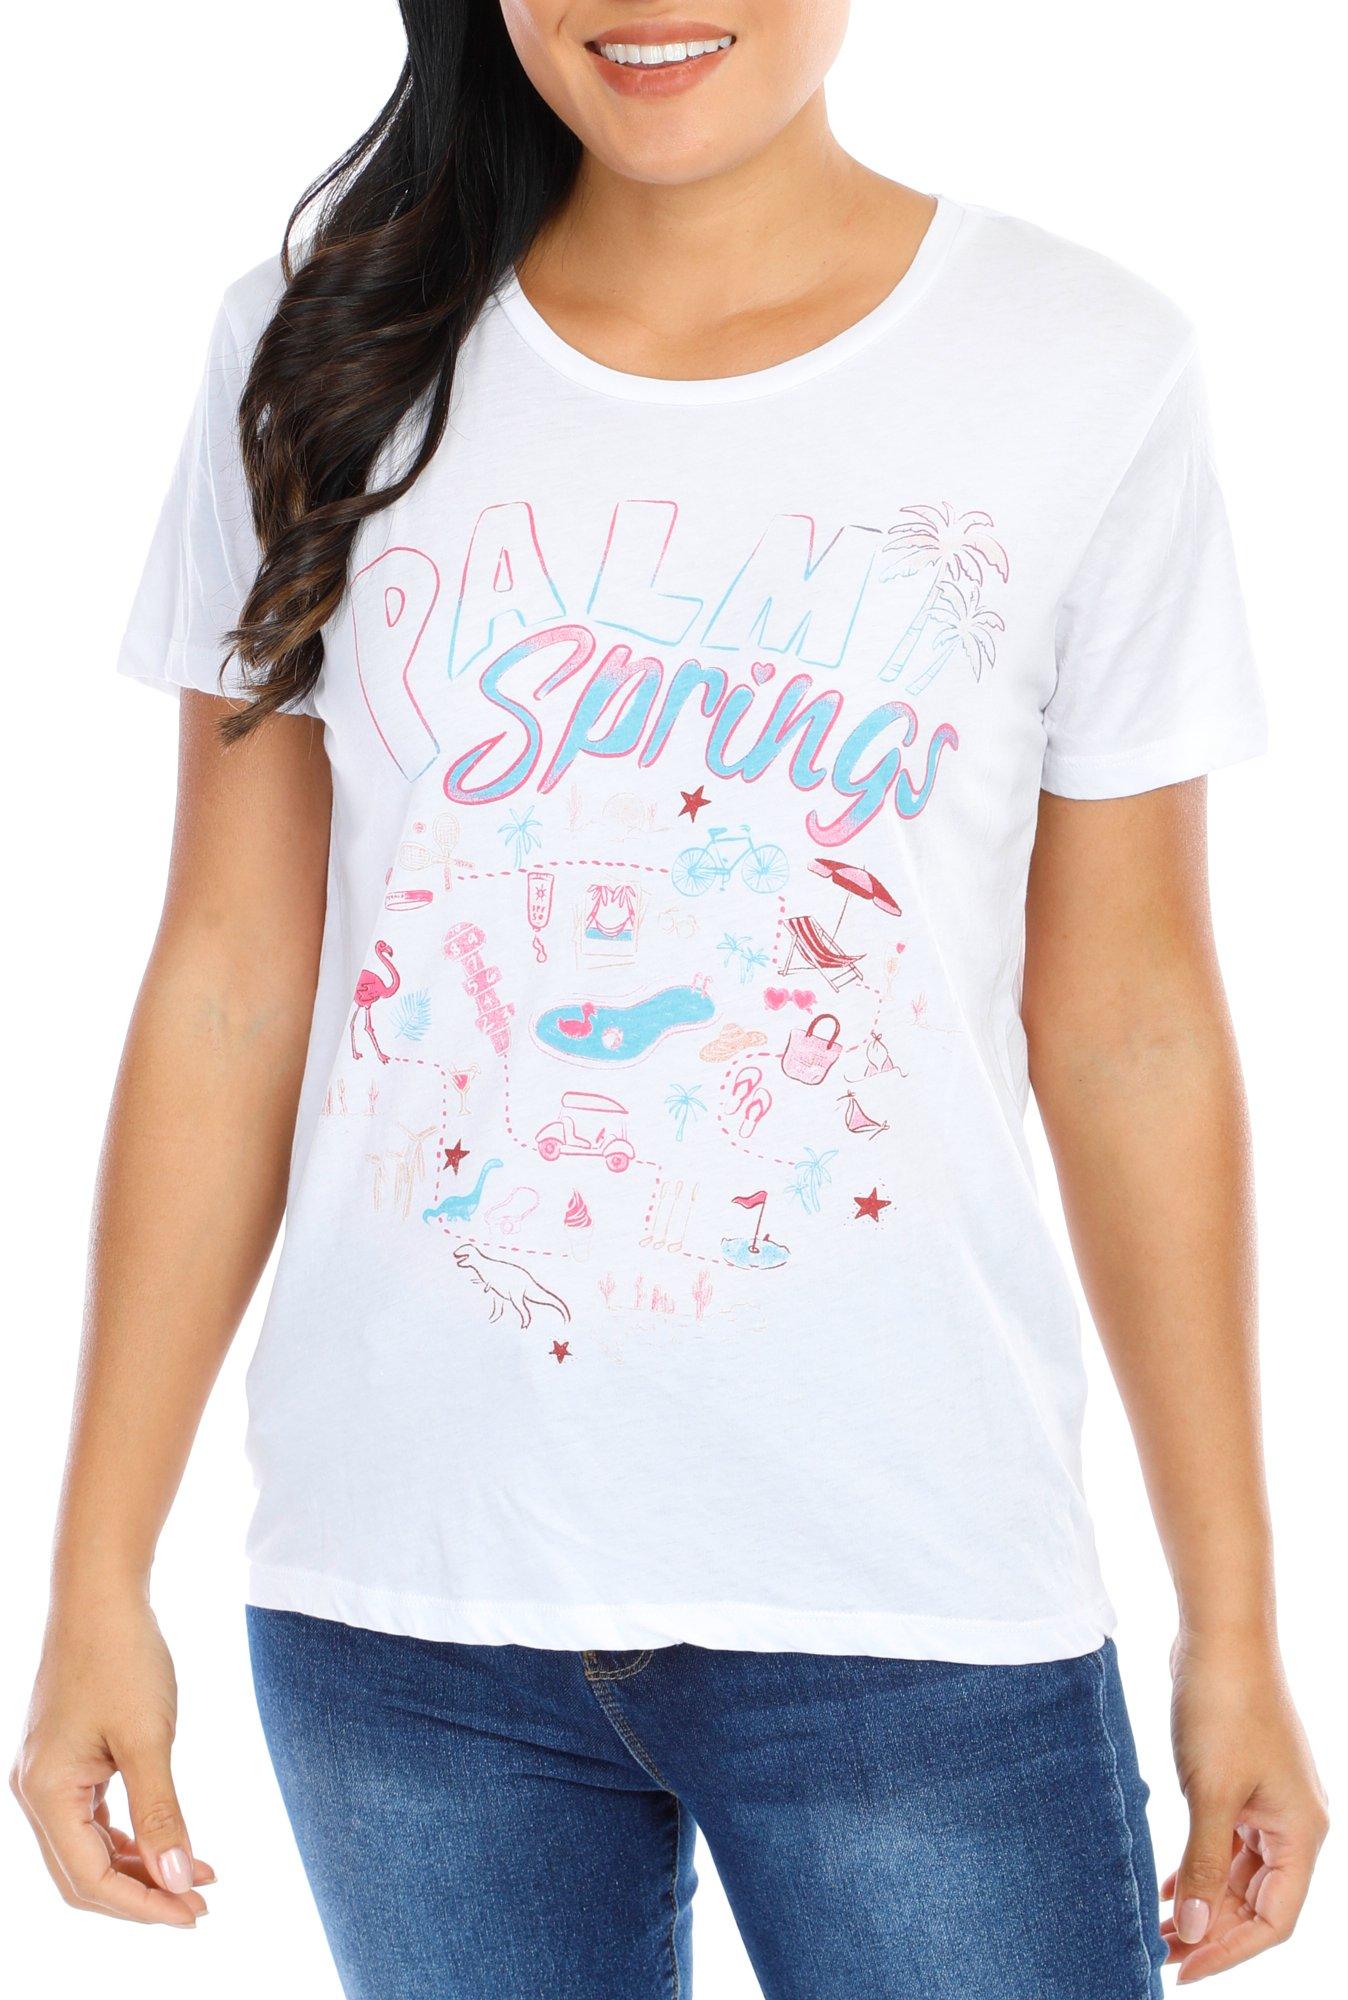 Women's Palm Springs Graphic Top